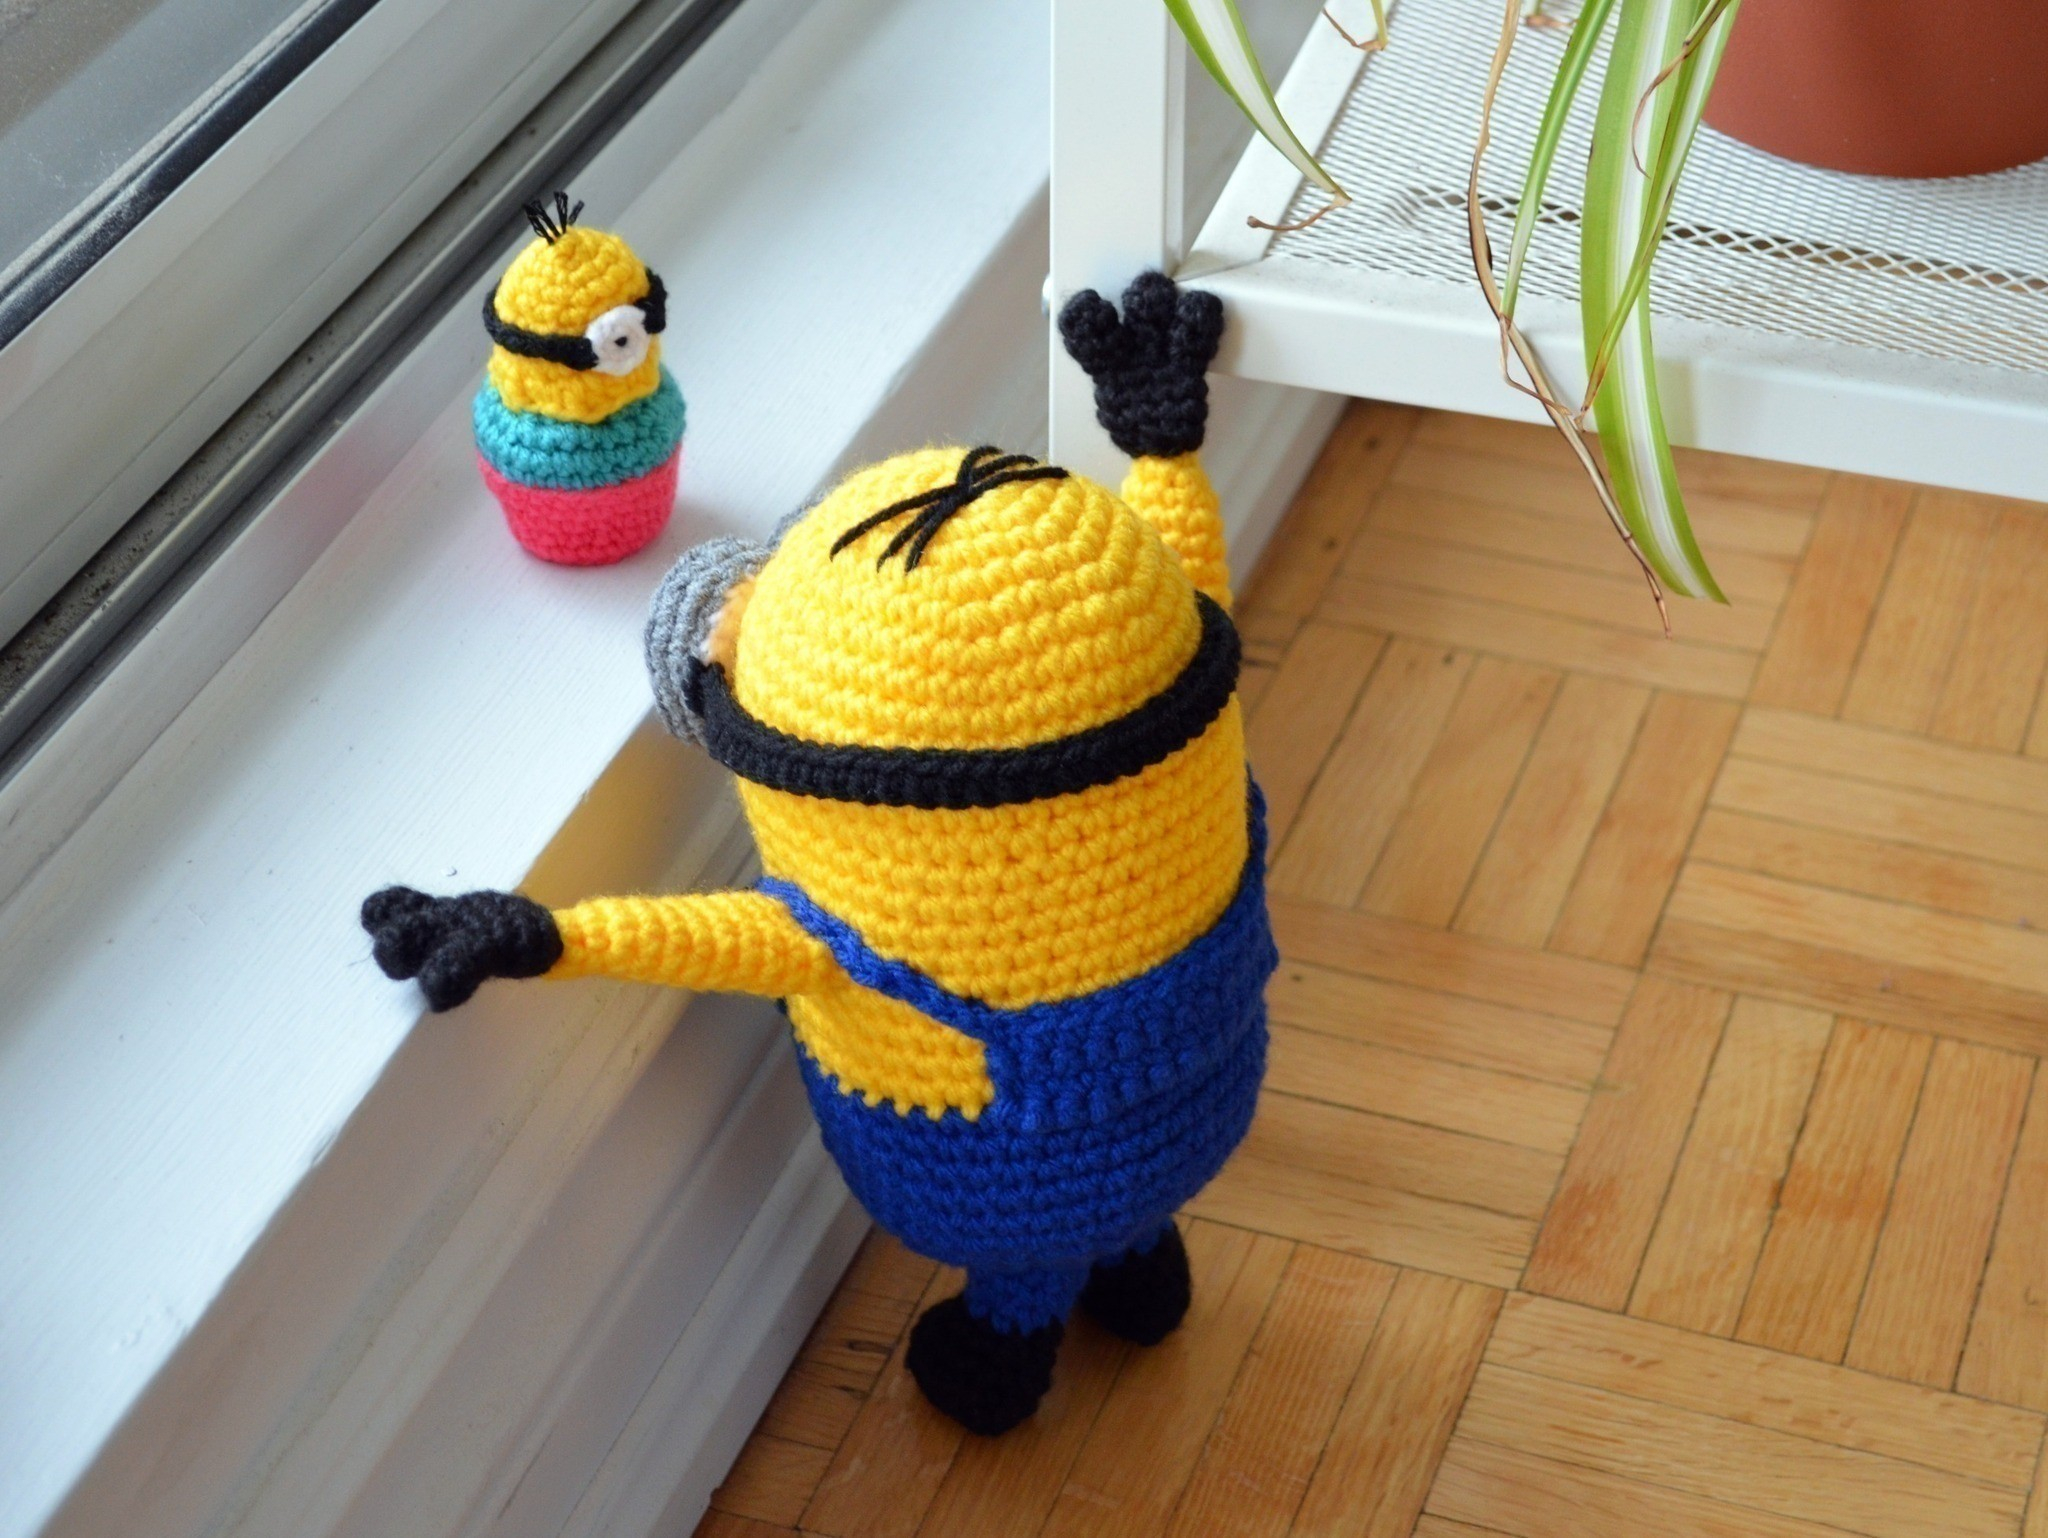 Knitting Patterns For Minions Minion And Cupcake How To Make A Food Plushie Yarncraft On Cut